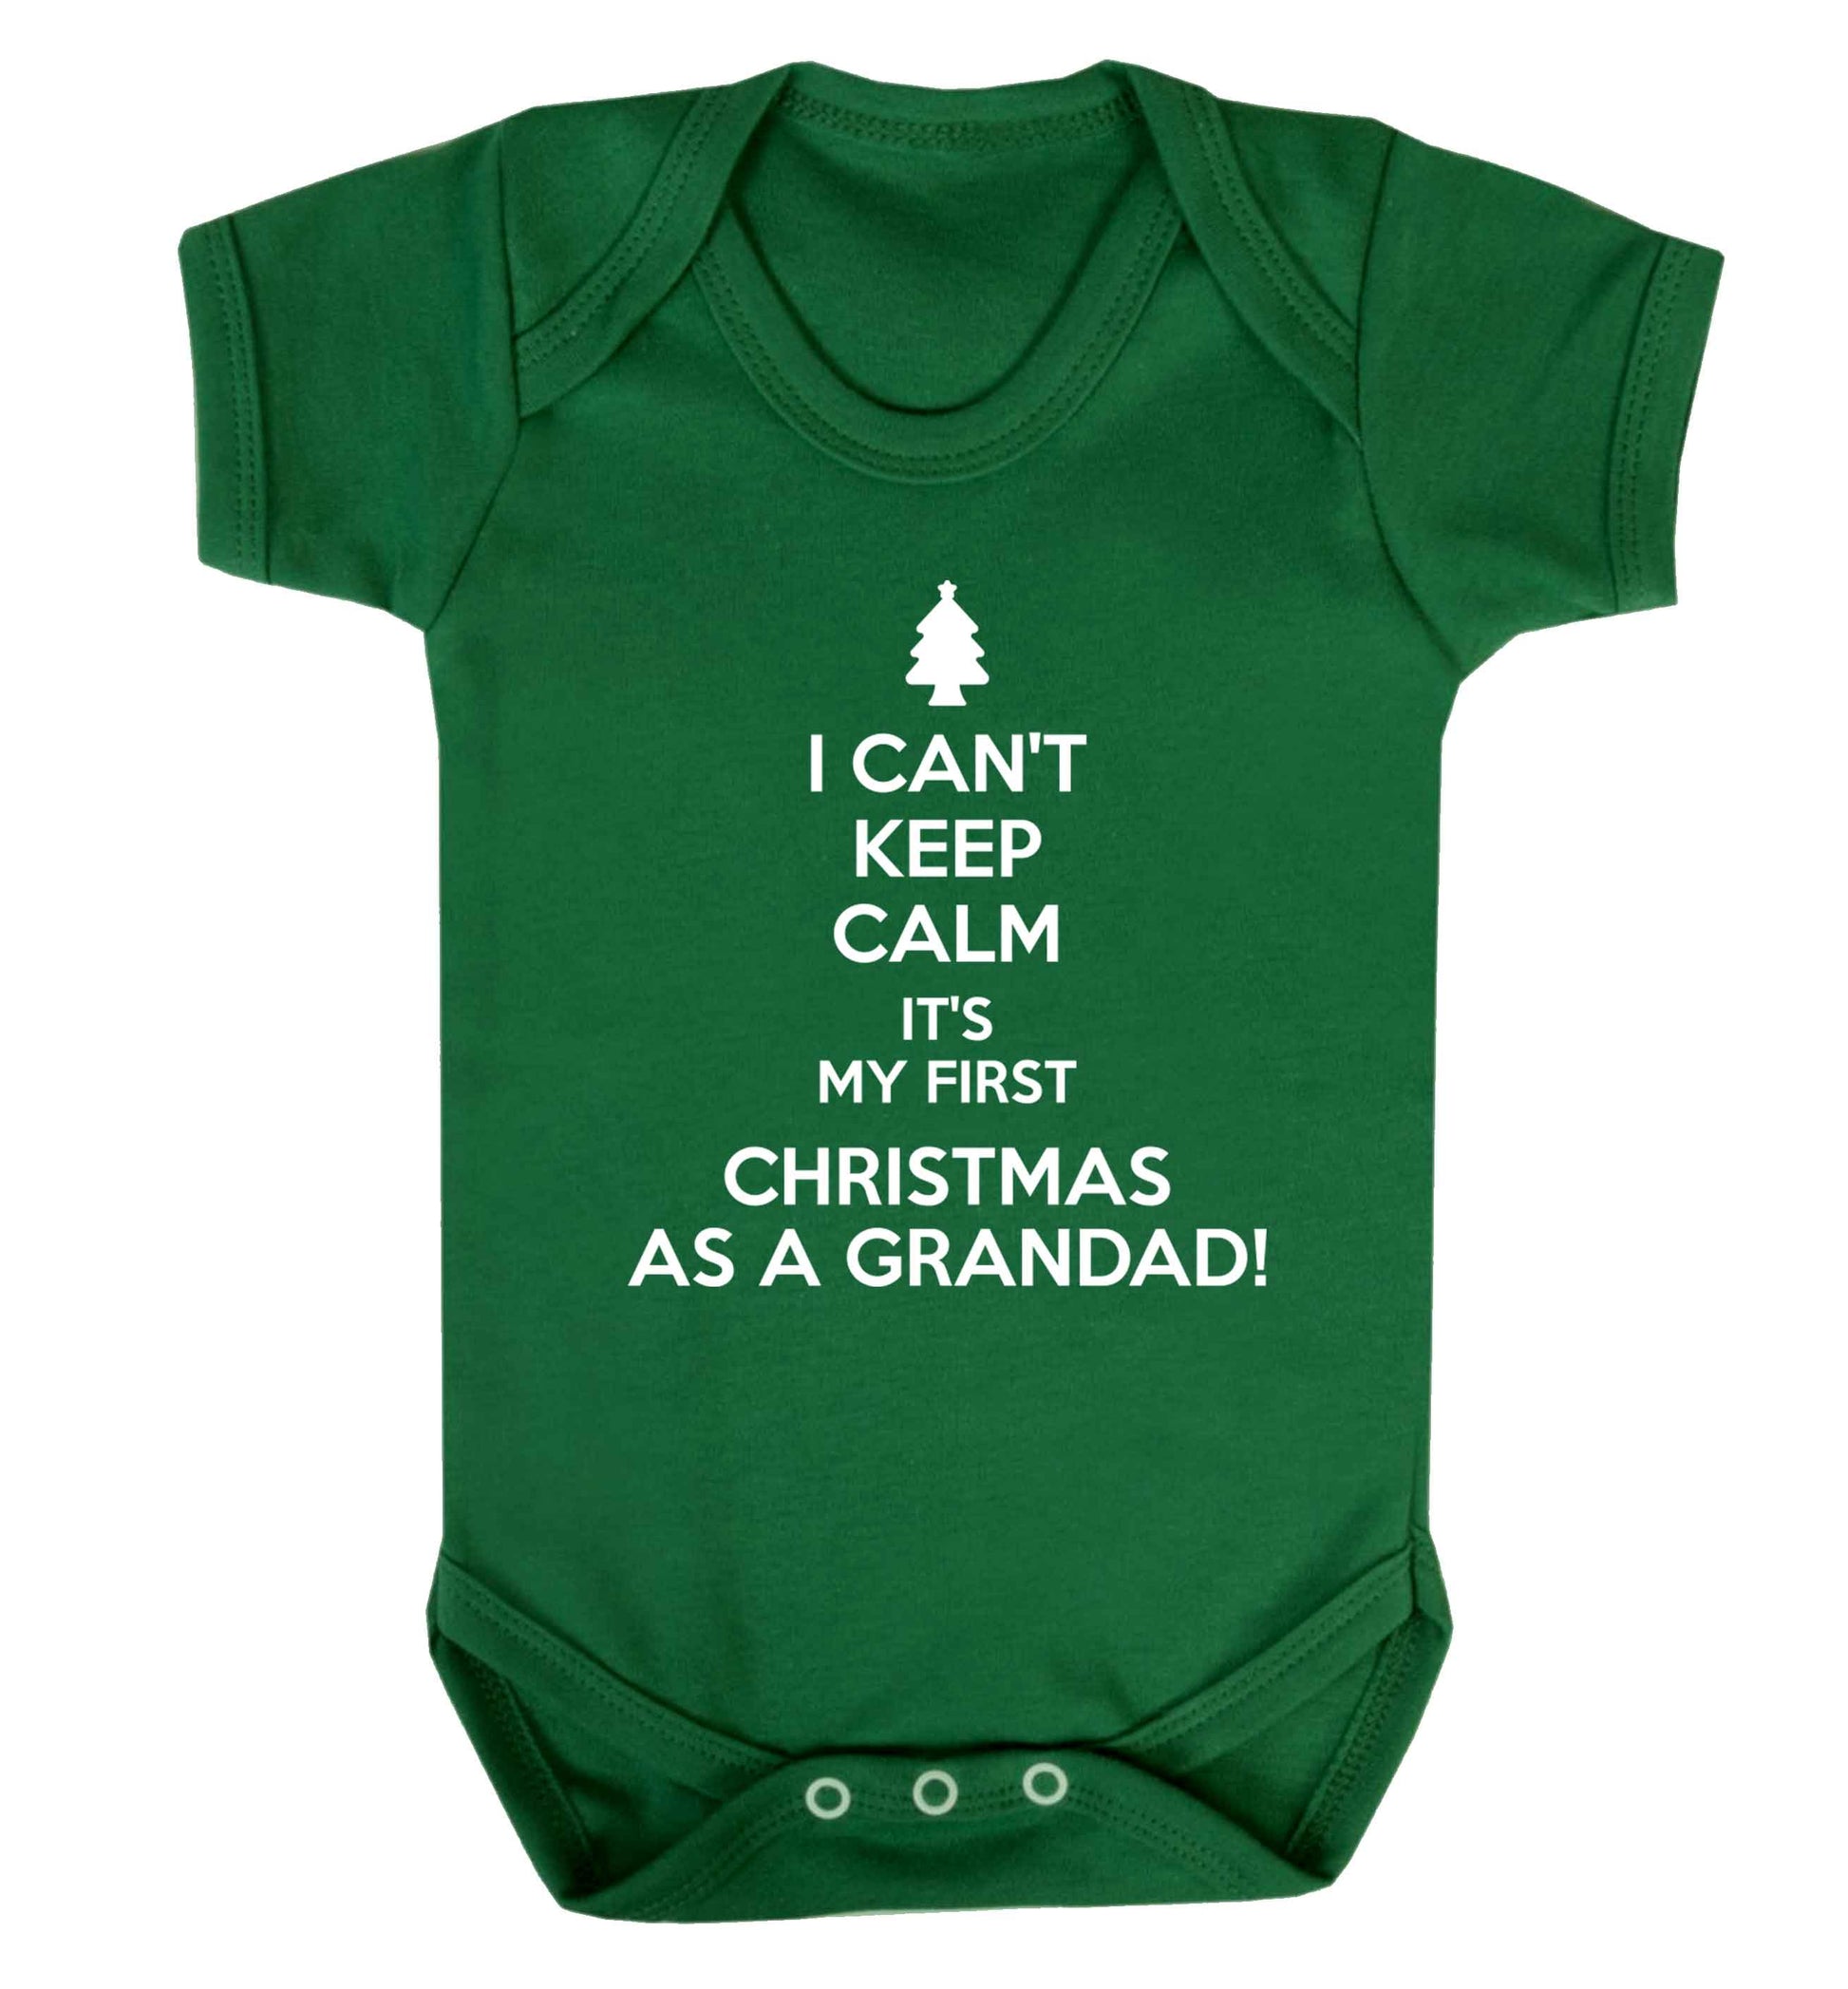 I can't keep calm it's my first Christmas as a grandad! Baby Vest green 18-24 months